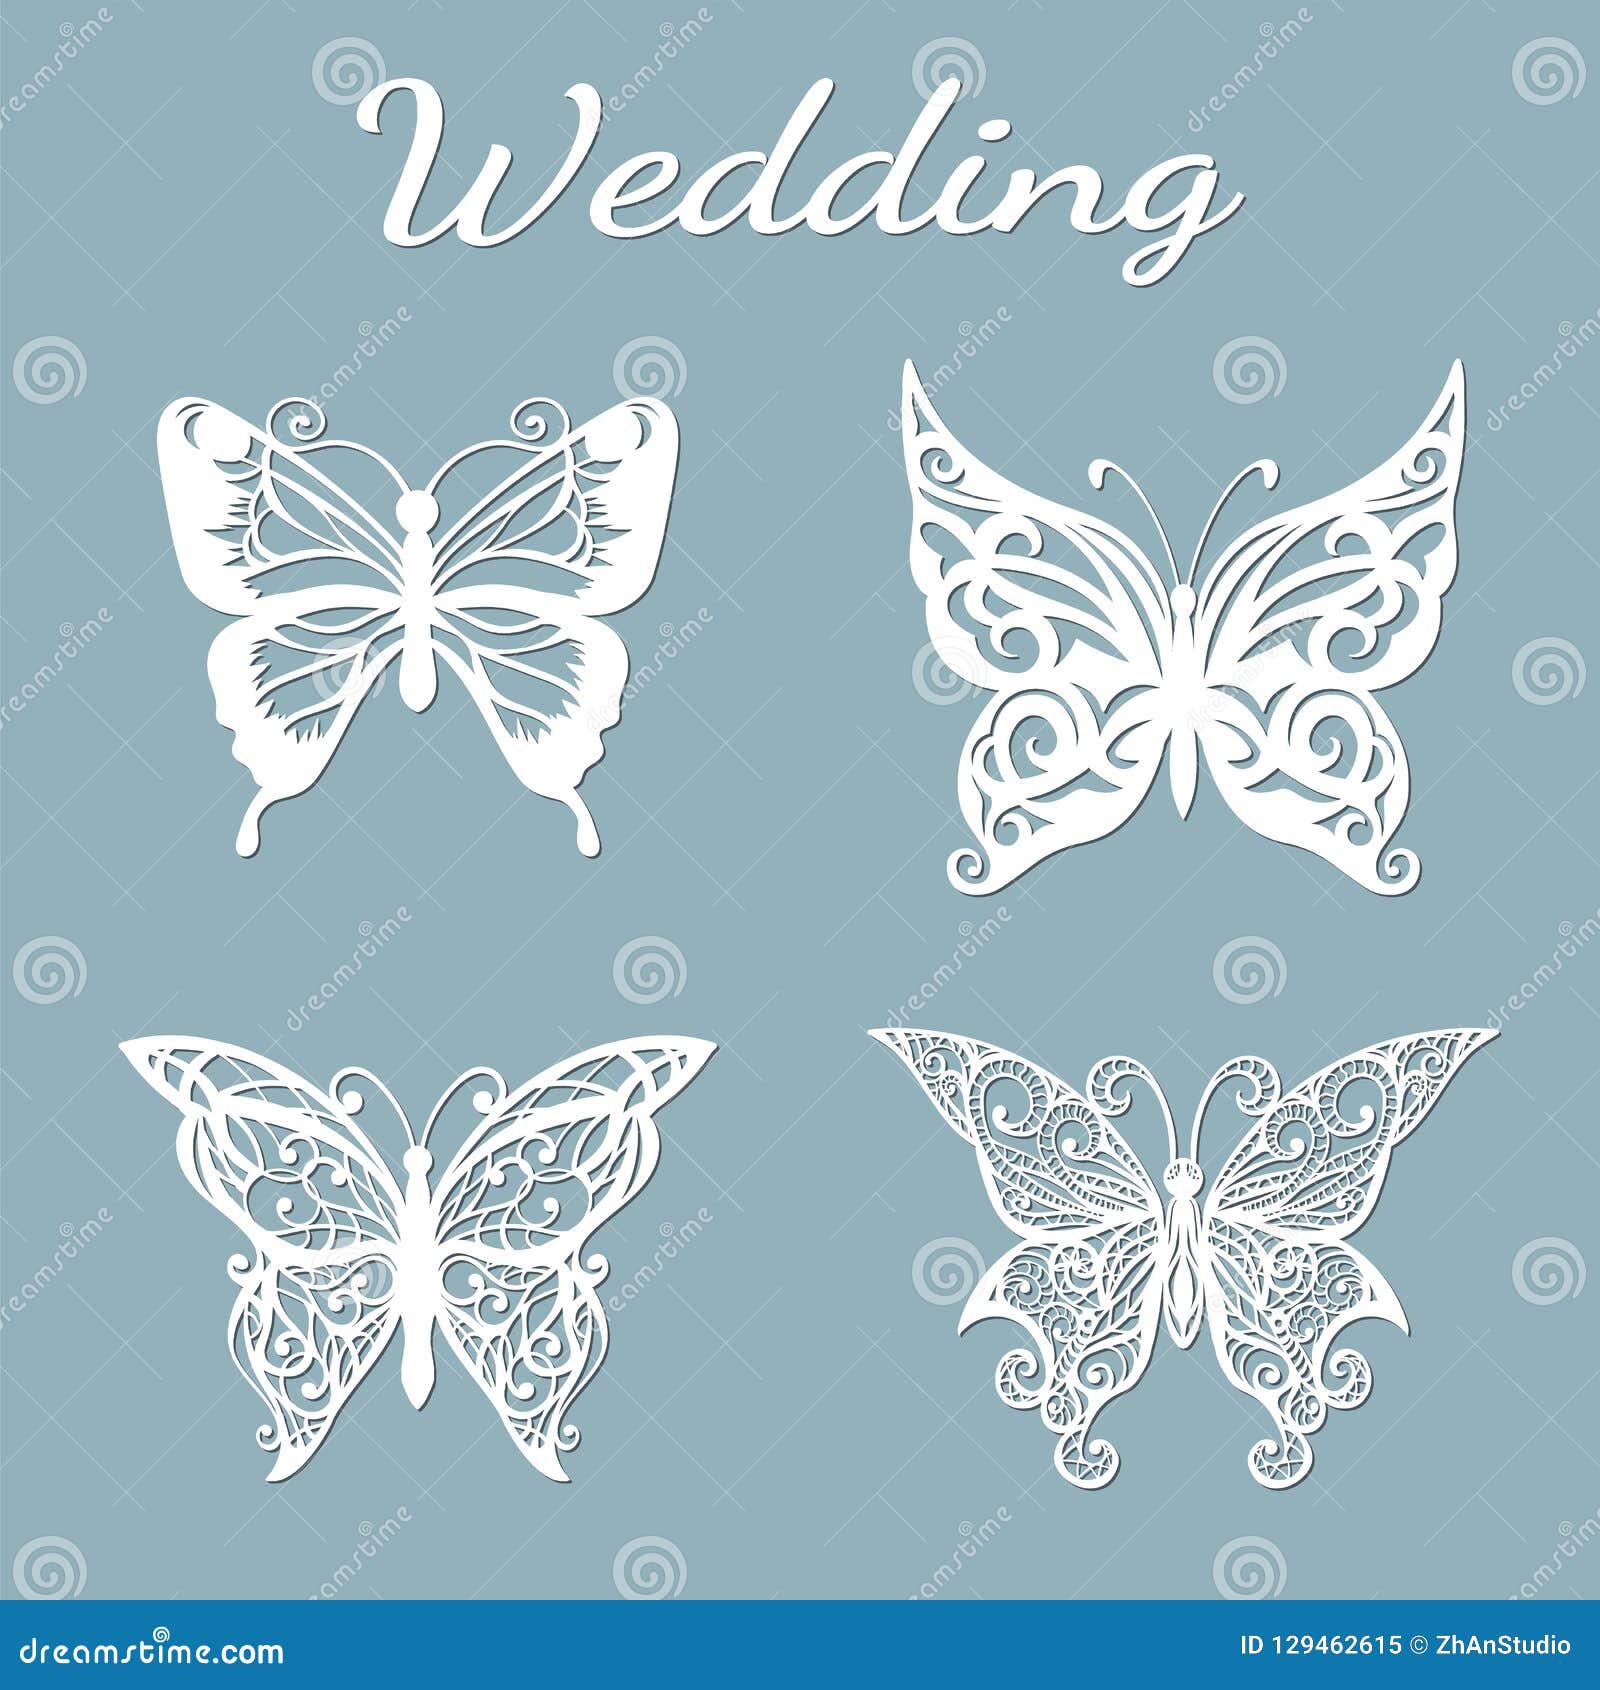 image with the inscription-wedding. template with   of butterflies. for laser cutting, plotter and silkscreen pr